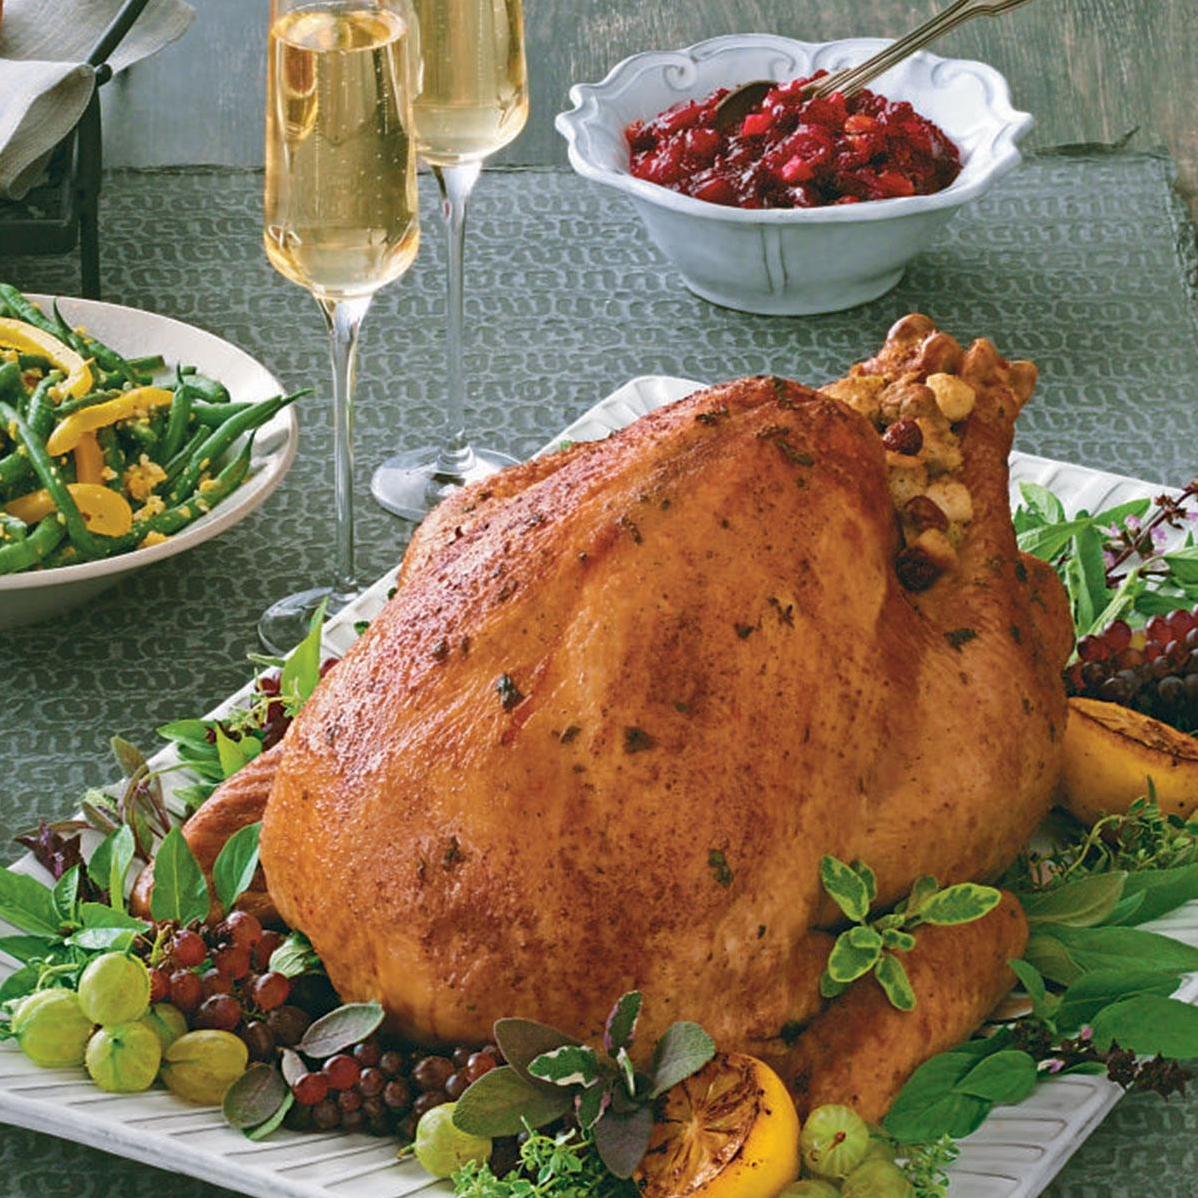  A bubbly twist to your classic turkey dish.